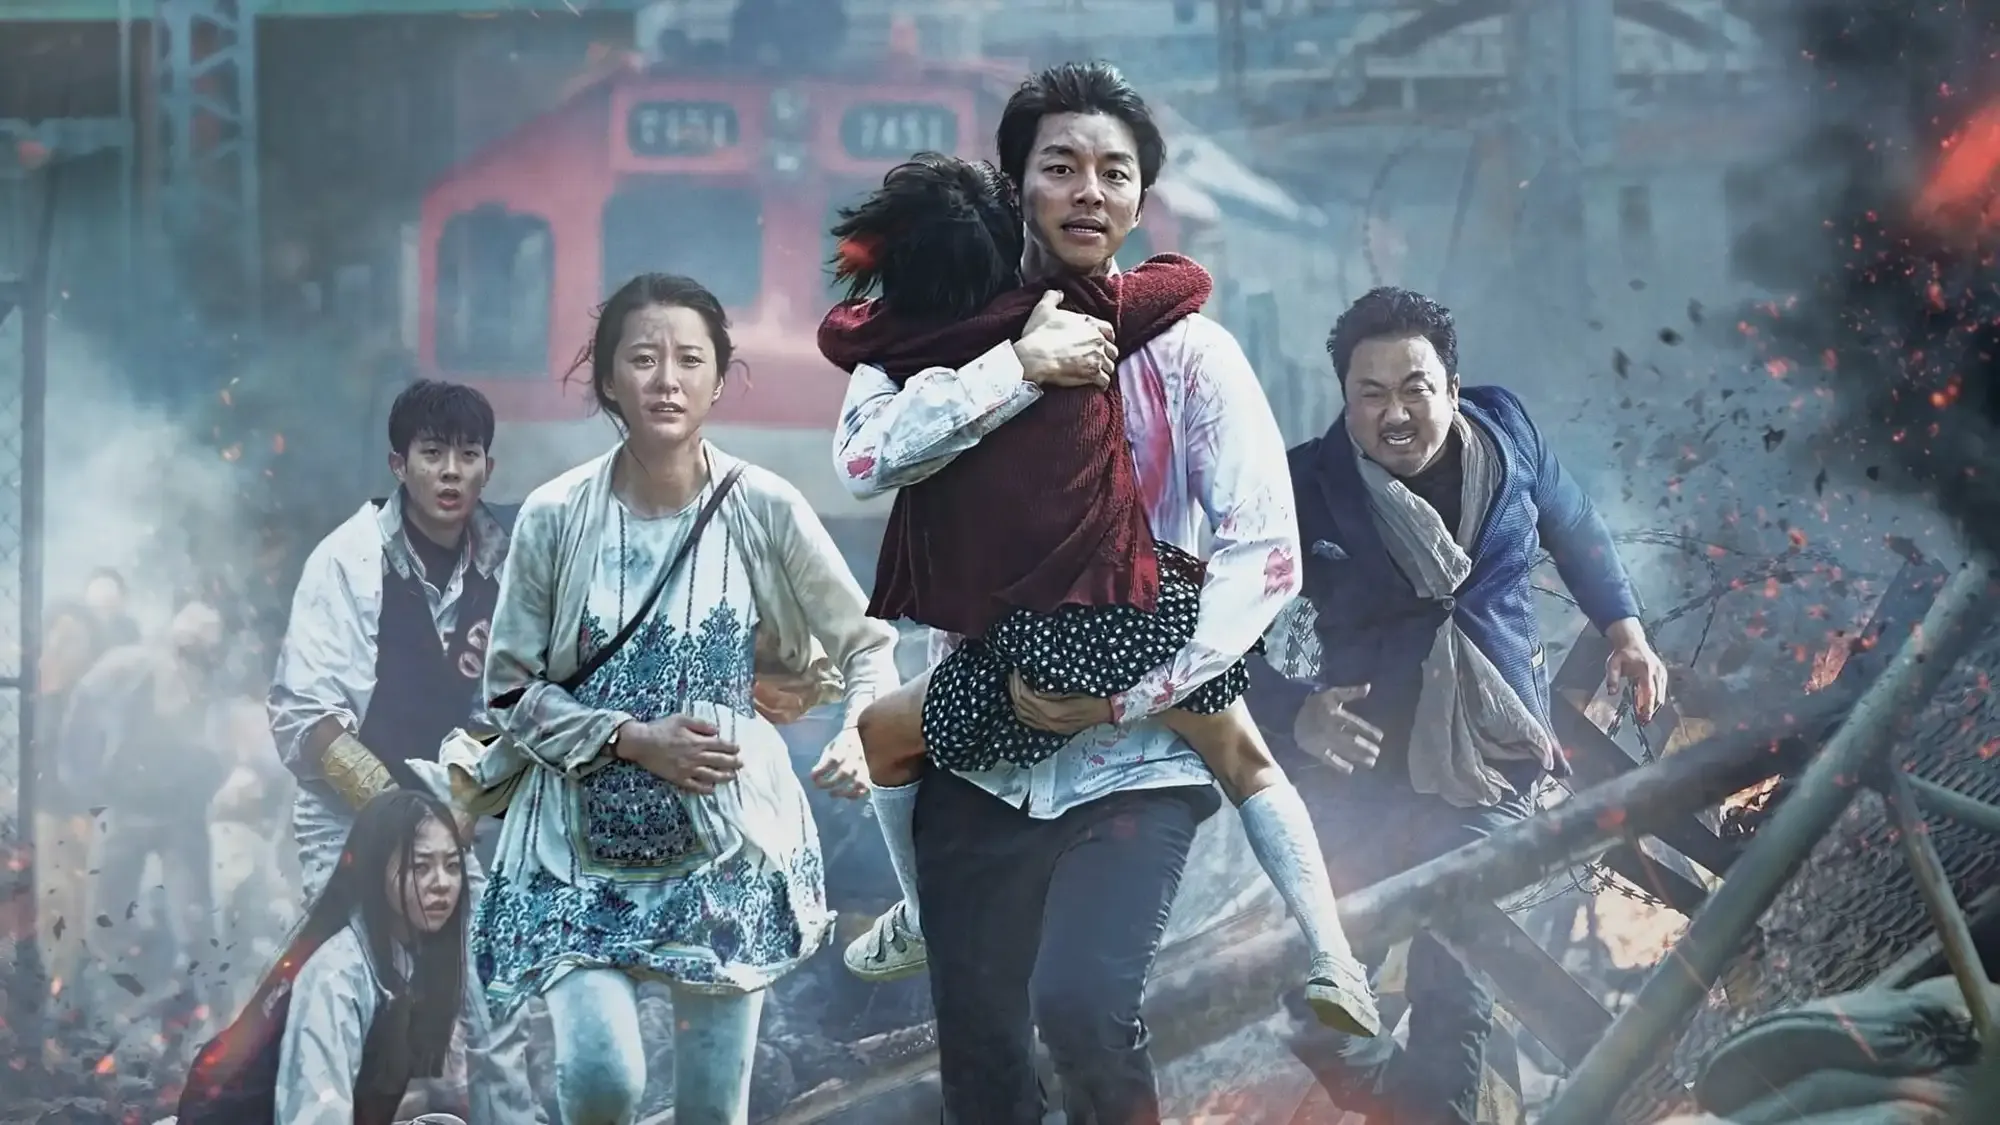 Train to Busan movie review